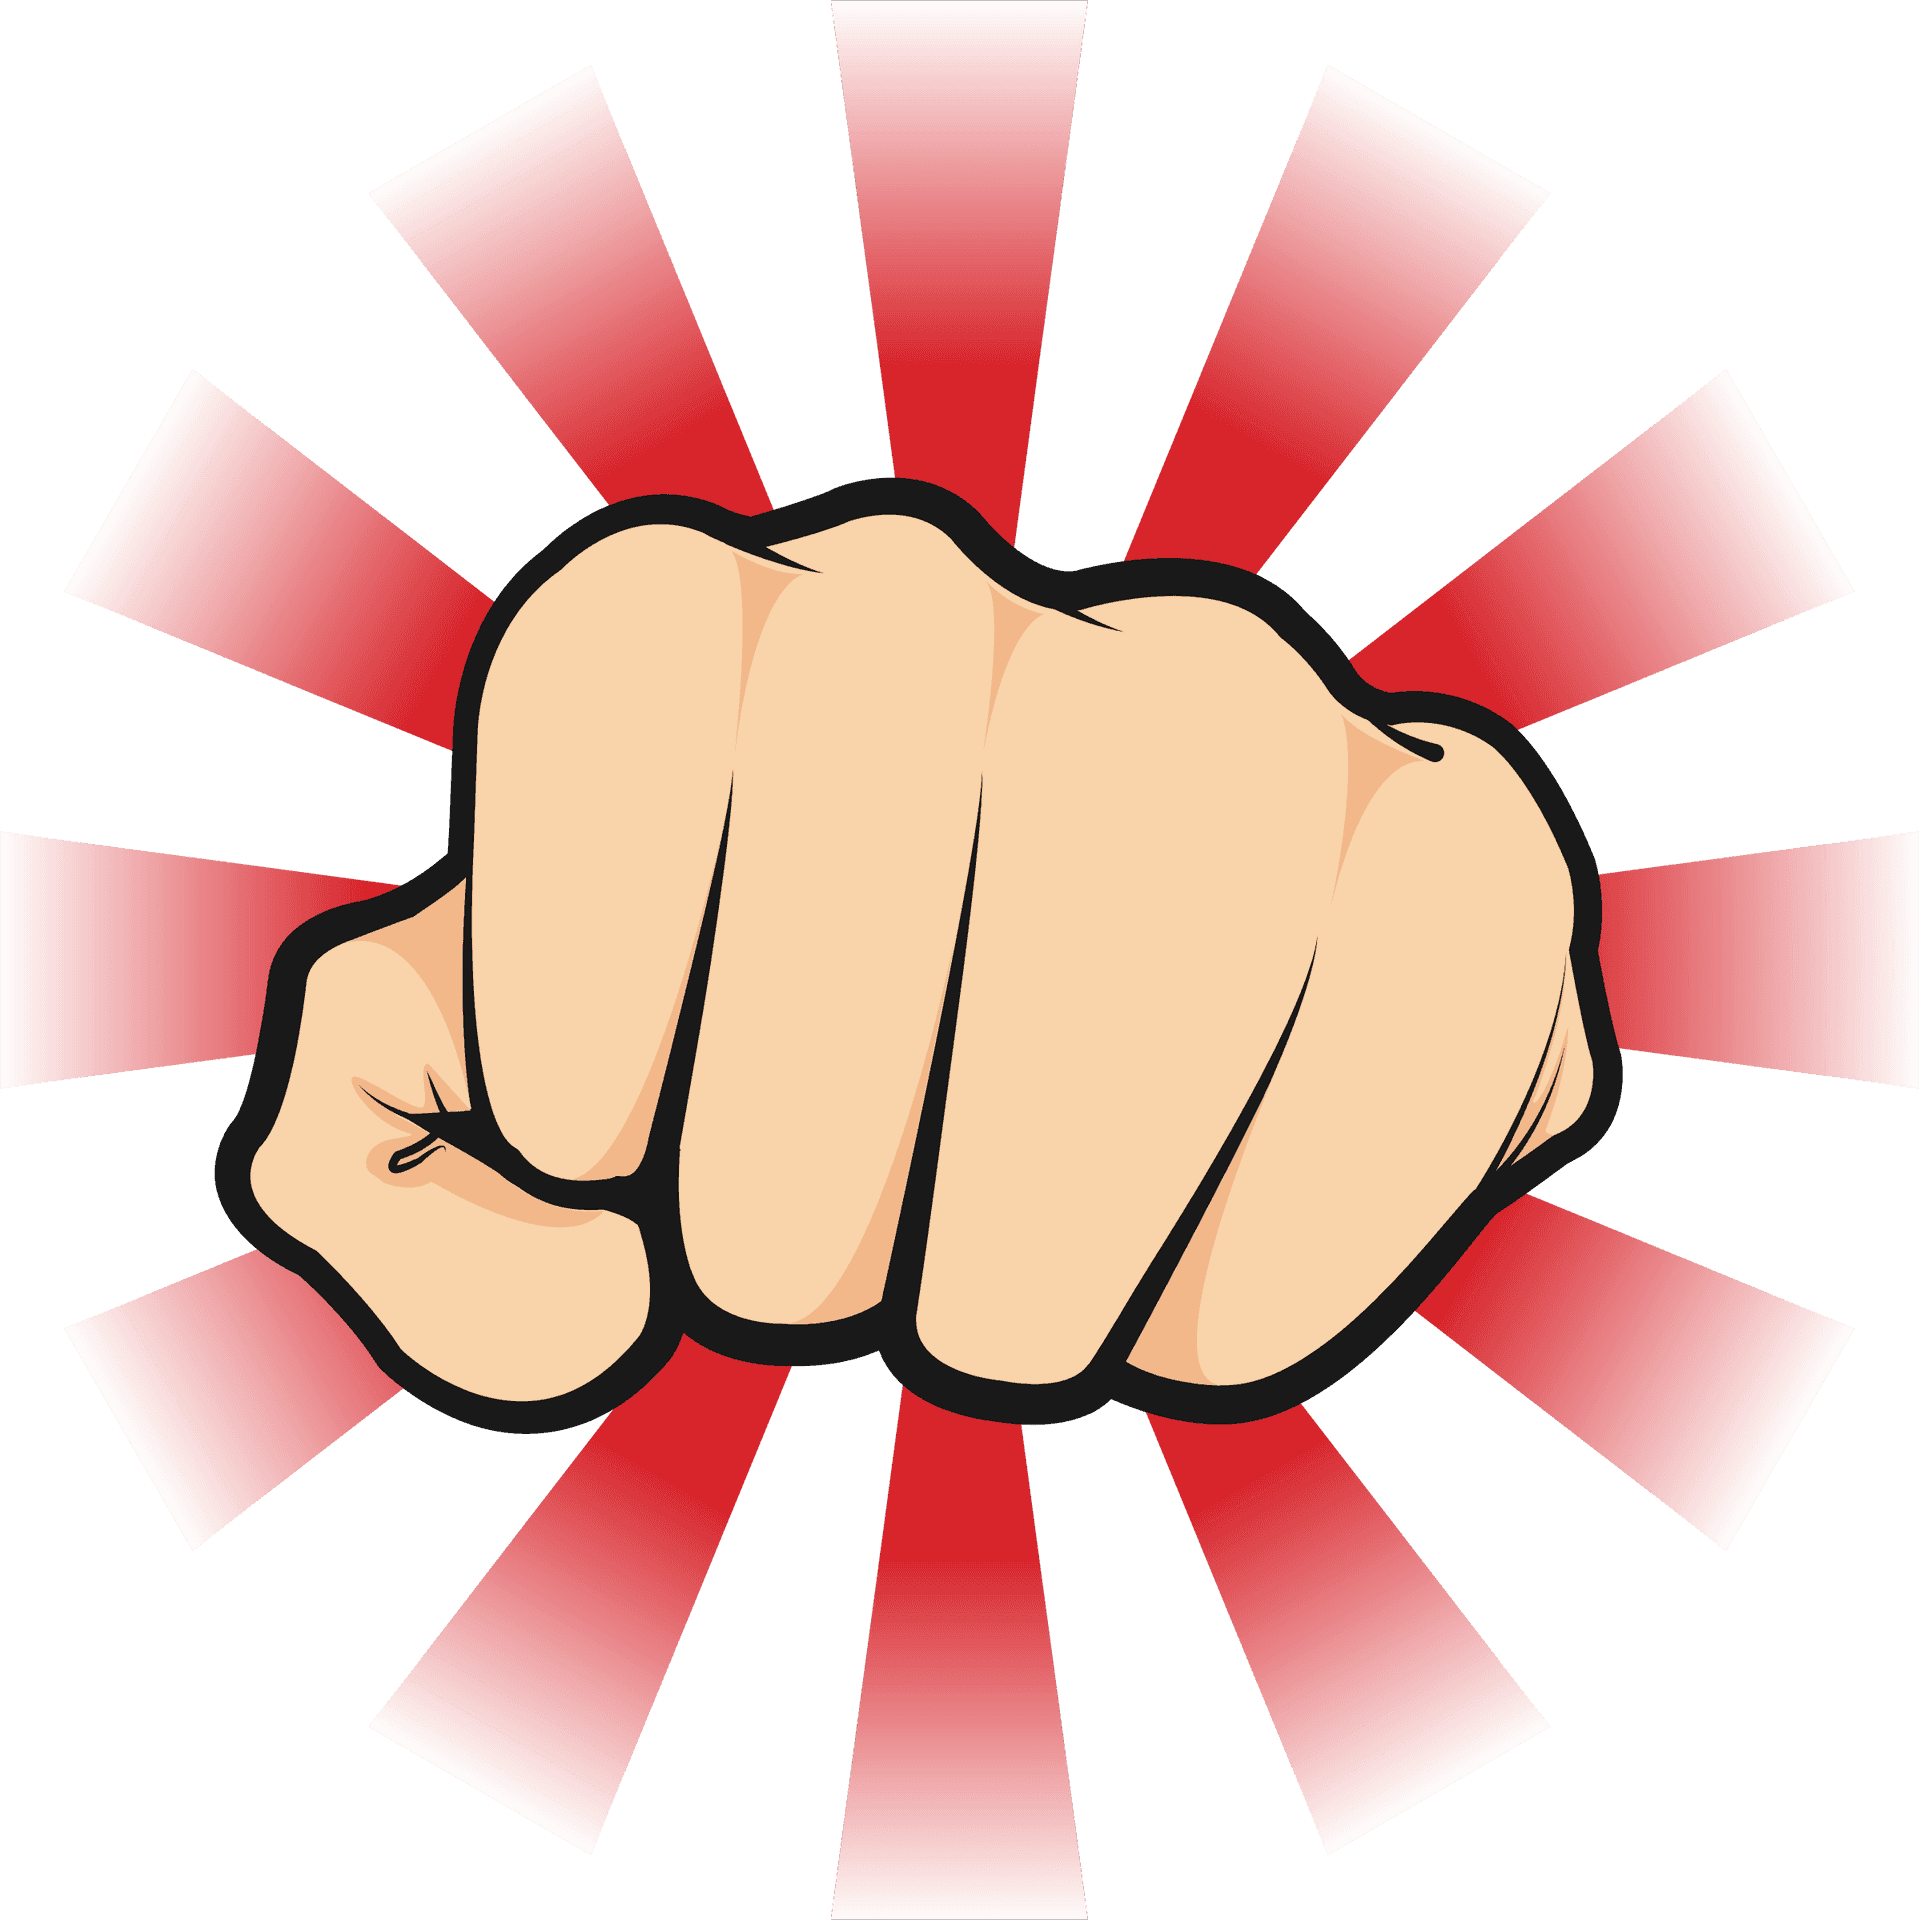 Powerful Fist Illustration PNG image